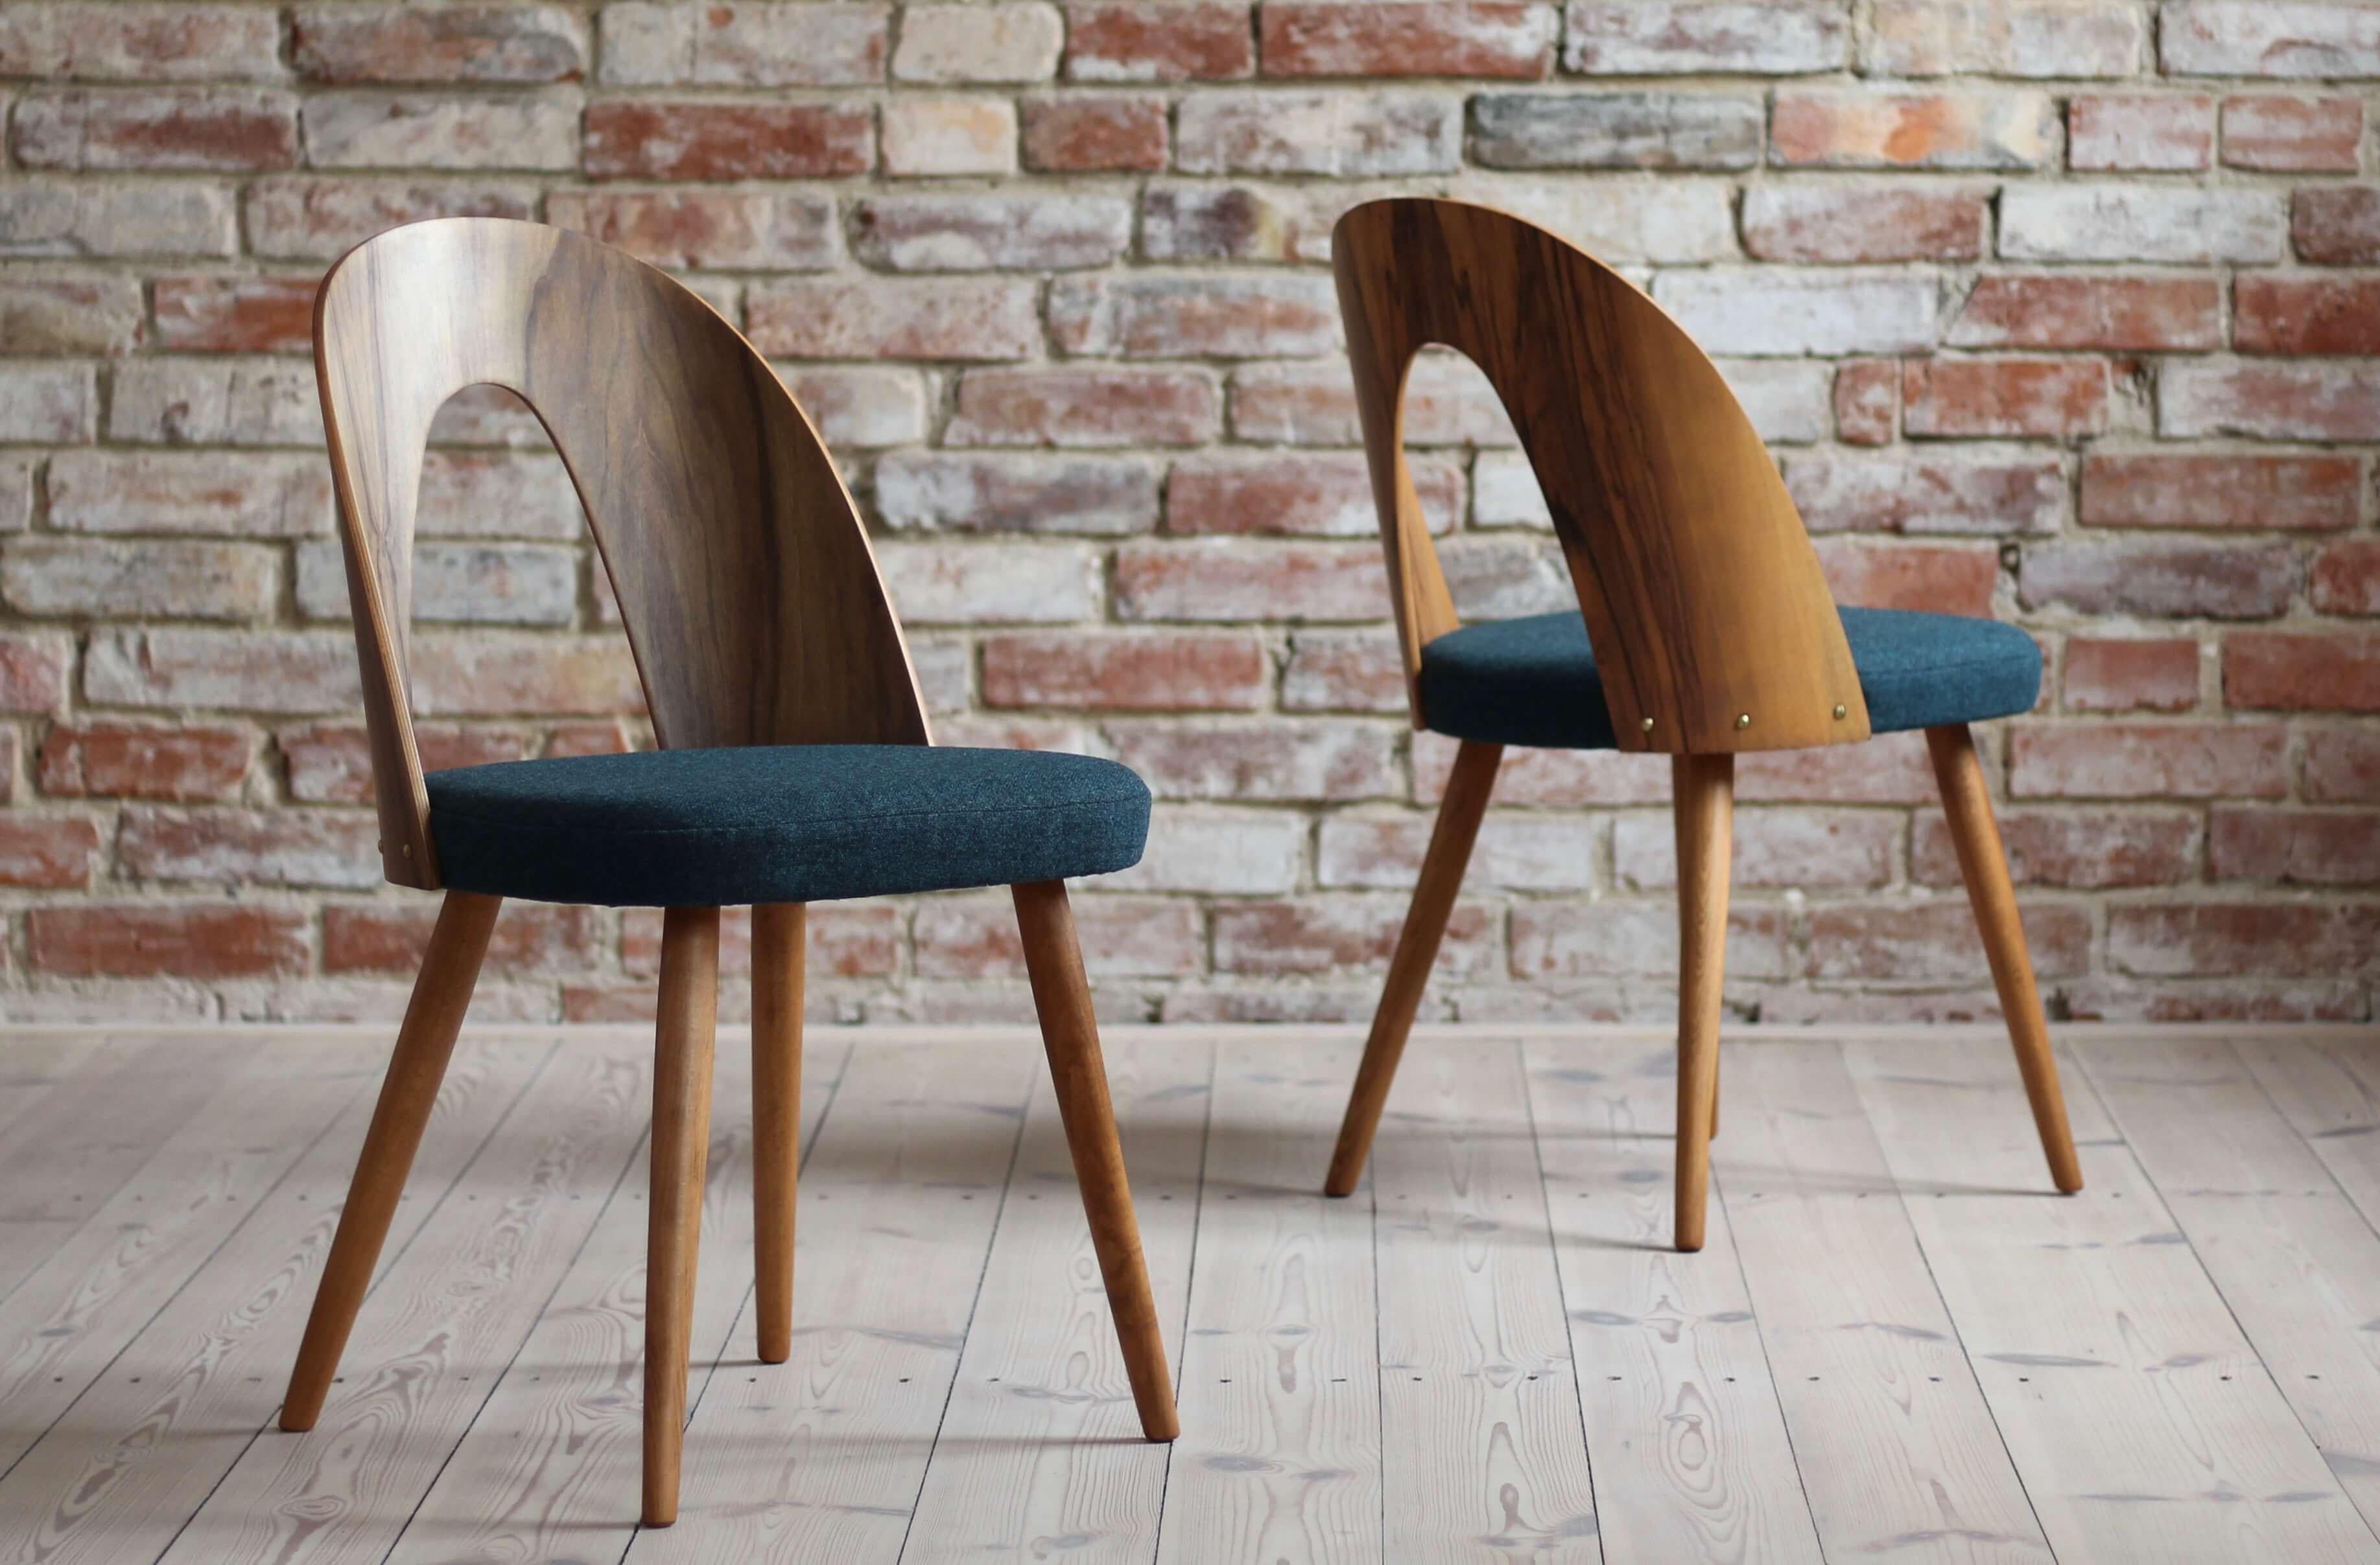 Set of 4 Midcentury Dining Chairs by A. Šuman, Reupholstered in Kvadrat Fabric In Good Condition In Wrocław, Poland